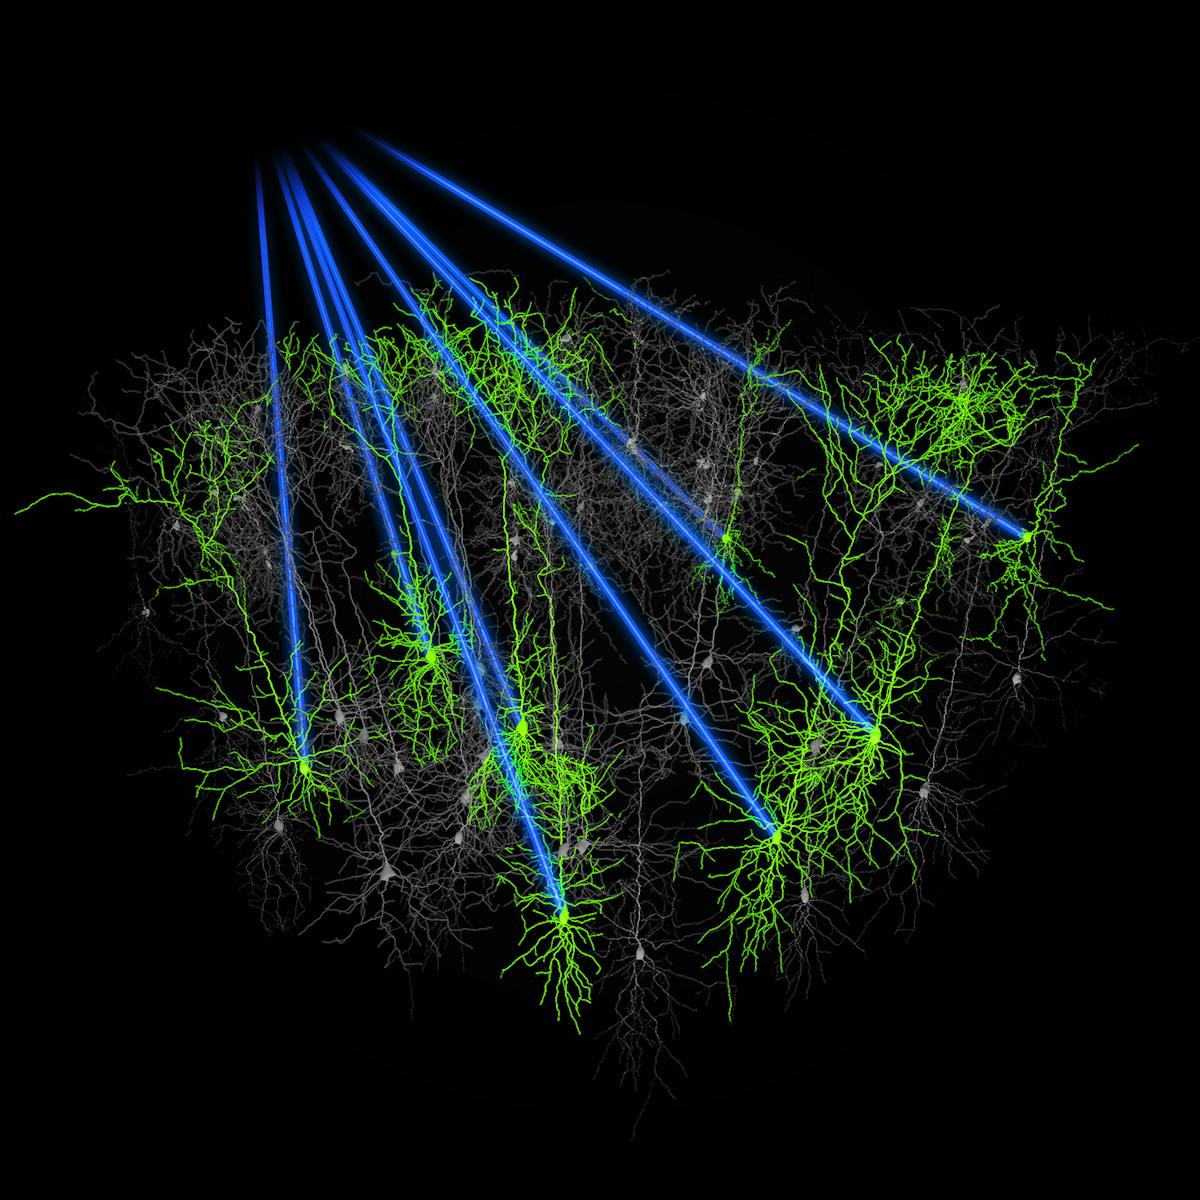 FIGURE 3. Higher power from femtosecond laser sources enables activation of multiple neurons within a population simultaneously, as shown in this artistic rendering.